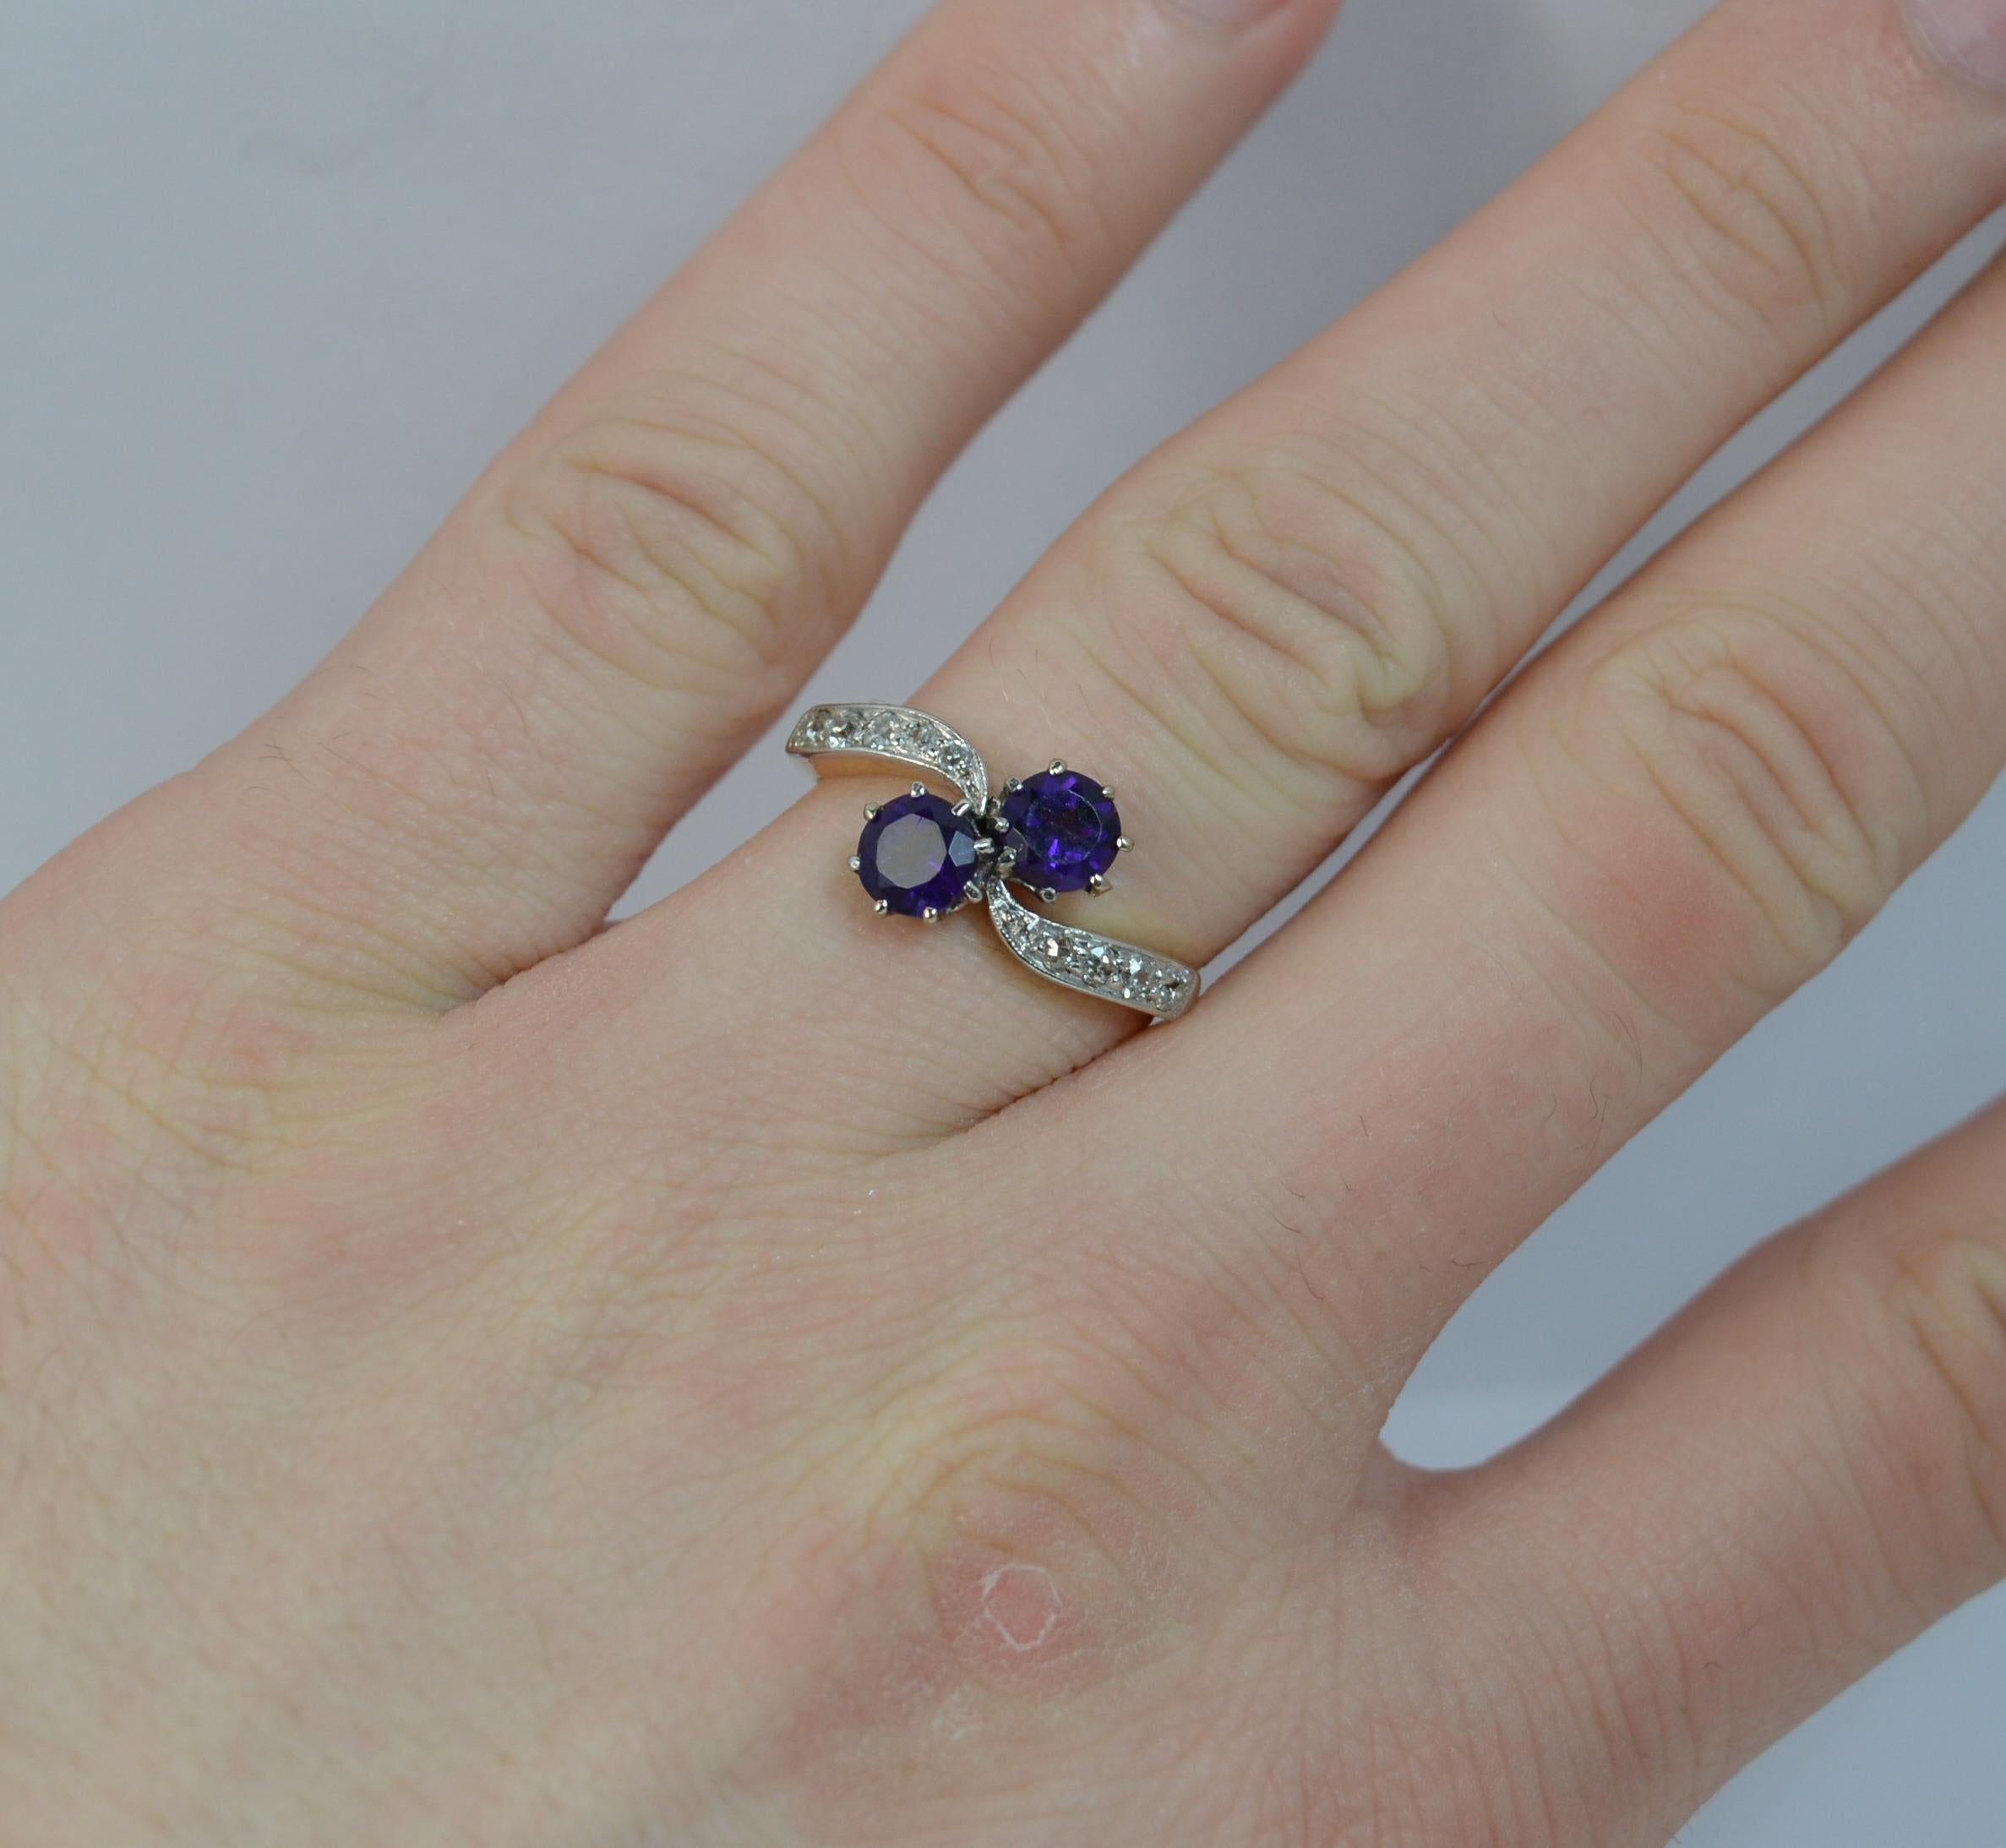 Antique 18 Carat Gold and Platinum Amethyst Toi et Moi Ring with Diamonds (Edwardian)